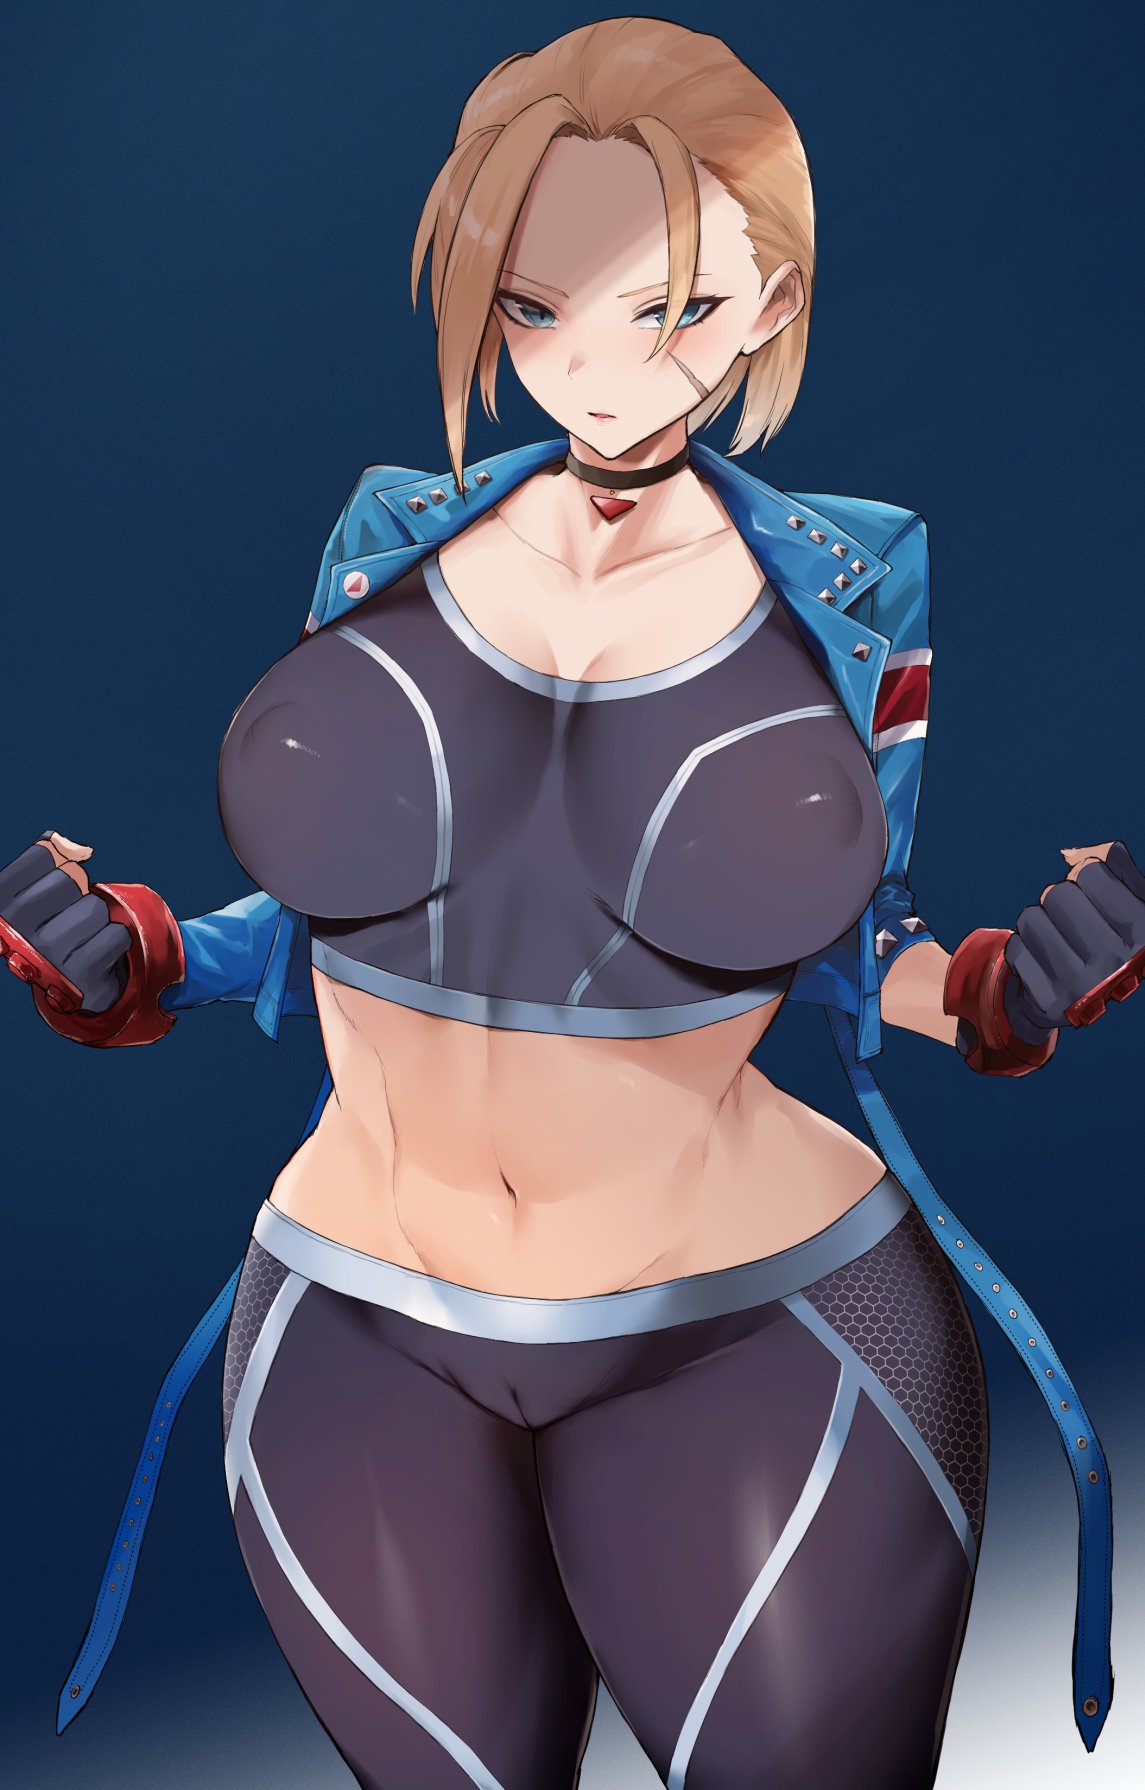 1girl 1girl 1girl 1girl 2020s 2023 2d 2d_(artwork) 5_fingers anime anime_nose anime_style beige_body beige_skin belly belly_button big_breasts big_breasts big_breasts big_hips big_nipples blonde_female blonde_hair blonde_hair_female blue_background blue_eyes blush blush_lines blushing_at_viewer breasts breasts breasts british british_female cammy_white capcom caucasian caucasian_female cleavage cleavage_cutout clothed clothed_female clothes clothing collar color colored cropped cropped_legs curvy curvy_body curvy_female curvy_figure curvy_hips curvy_thighs ear ears ears_up erect erect_nipple erect_nipples erect_nipples_under_clothes erection erection_under_clothes erection_under_clothing european european_female eyelashes eyes eyes_half_open eyes_open fanart female_focus female_only fighter fighting_game fighting_stance fingerless_glove fingerless_gloves fingers first_person_perspective first_person_view genital_outline genital_slit genitals glove gloves hair hair_over_one_eye half-closed_eye half-closed_eyes half-erect hips human humanoid humanoid_genitalia jacket jacket_open kataku_musou light-skinned light-skinned_female light_skin lips looking_at_viewer mammal mammal_humanoid martial_artist martial_arts mature mature_female mouth mouth_opened multicolored_background neck neckerchief necklace nipple_bulge nipples no_dialogue no_panties no_text nsfw open_mouth pale-skinned_female pale_skin partially_clothed partially_nude partially_nude_female partially_undressed pointy_chin pov_eye_contact pussy pussy pussy_bulge pussy_visible_through_clothes reveal revealing revealing_breasts revealing_clothes revealing_clothing revealing_outfit scar scar_on_face scarred scarred_face scarring short_hair simple_background slight_blush slim solo_female solo_focus street_fighter street_fighter_6 suggestive suggestive_look suggestive_pose suggestive_posing tagme textless thick_thighs thighs tight tight_clothes tight_clothing tight_dress tight_fit tight_pants tight_pussy tongue two_tone_background vagina_visible_through_clothing video_game video_game_character video_game_franchise video_games white_body white_skin wide_hips wide_thighs yellow_hair